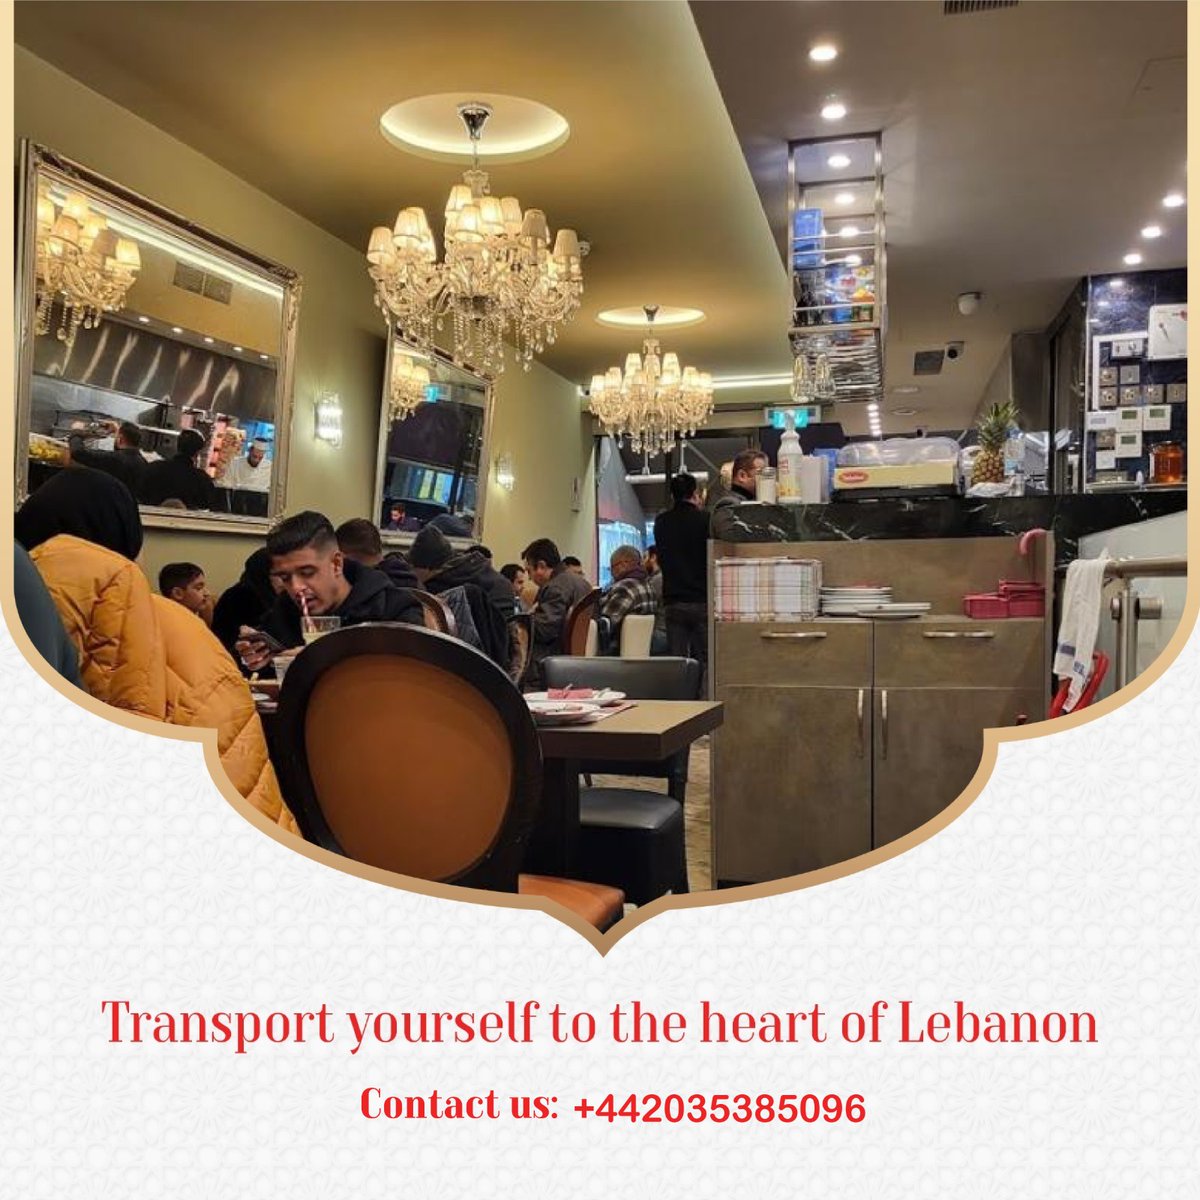 Say Hello to our warm and inviting atmosphere🥰 Indulge in exquisite Lebanese cuisine amidst the streets of London and enjoy the cultures.🇱🇧 🇬🇧 Enjoy vibes with us☺️ 'Transport yourself to the heart of Lebanon'❤️ #lebaneserestaurant #lebanesecusiene #Topfood #foodie #food #lunch